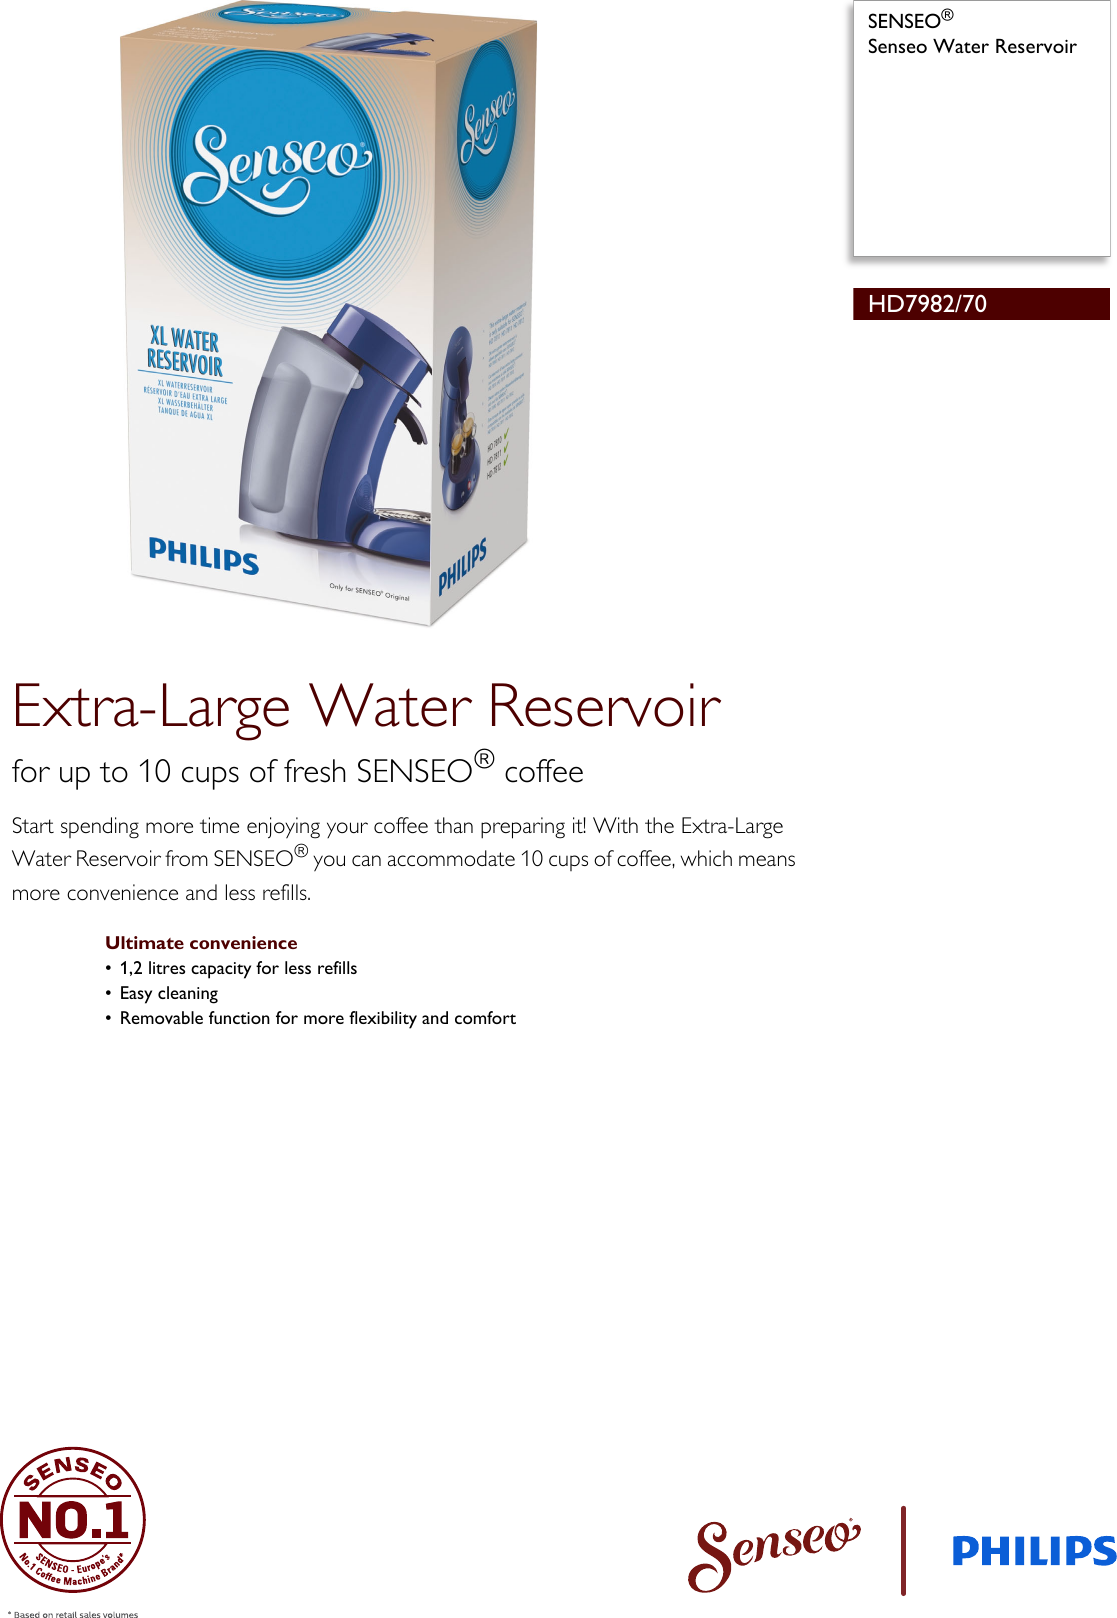 Page 1 of 2 - Philips HD7982/70 SENSEO® Senseo Water Reservoir User Manual Leaflet Hd7982 70 Pss Engsg